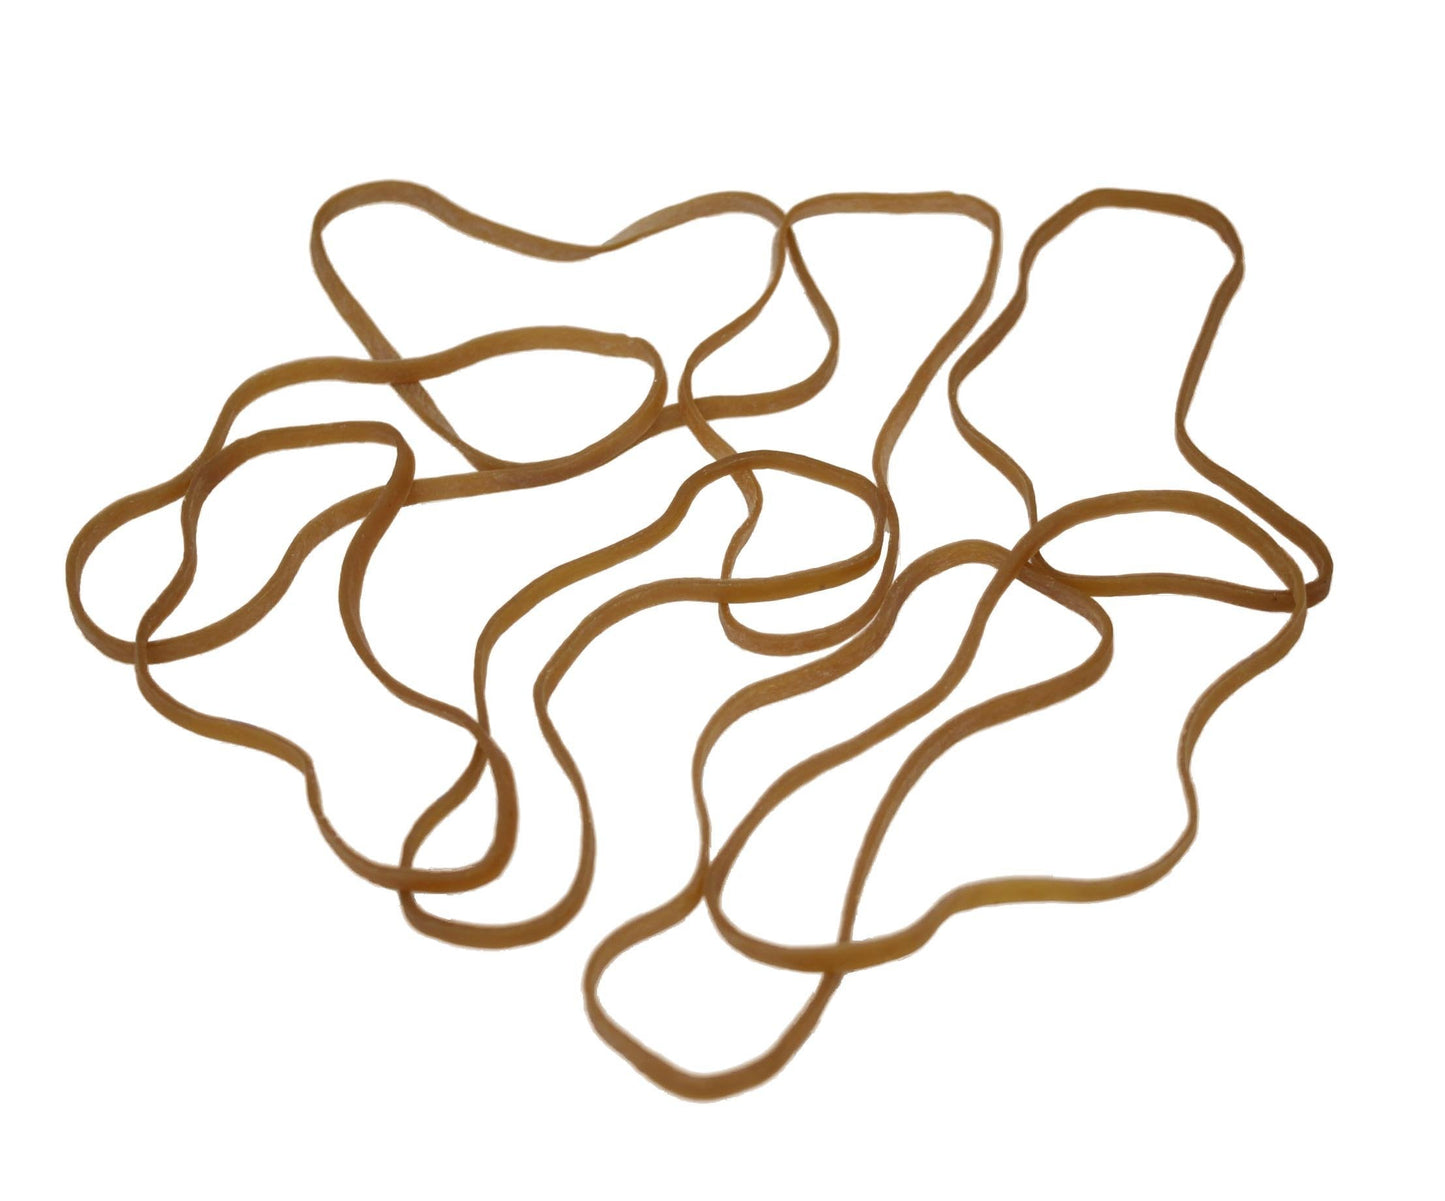 Brown Elastic Rubber Bands Large Heavy Duty Rubber Bands 50 Packs 5940 (Large Letter Rate)